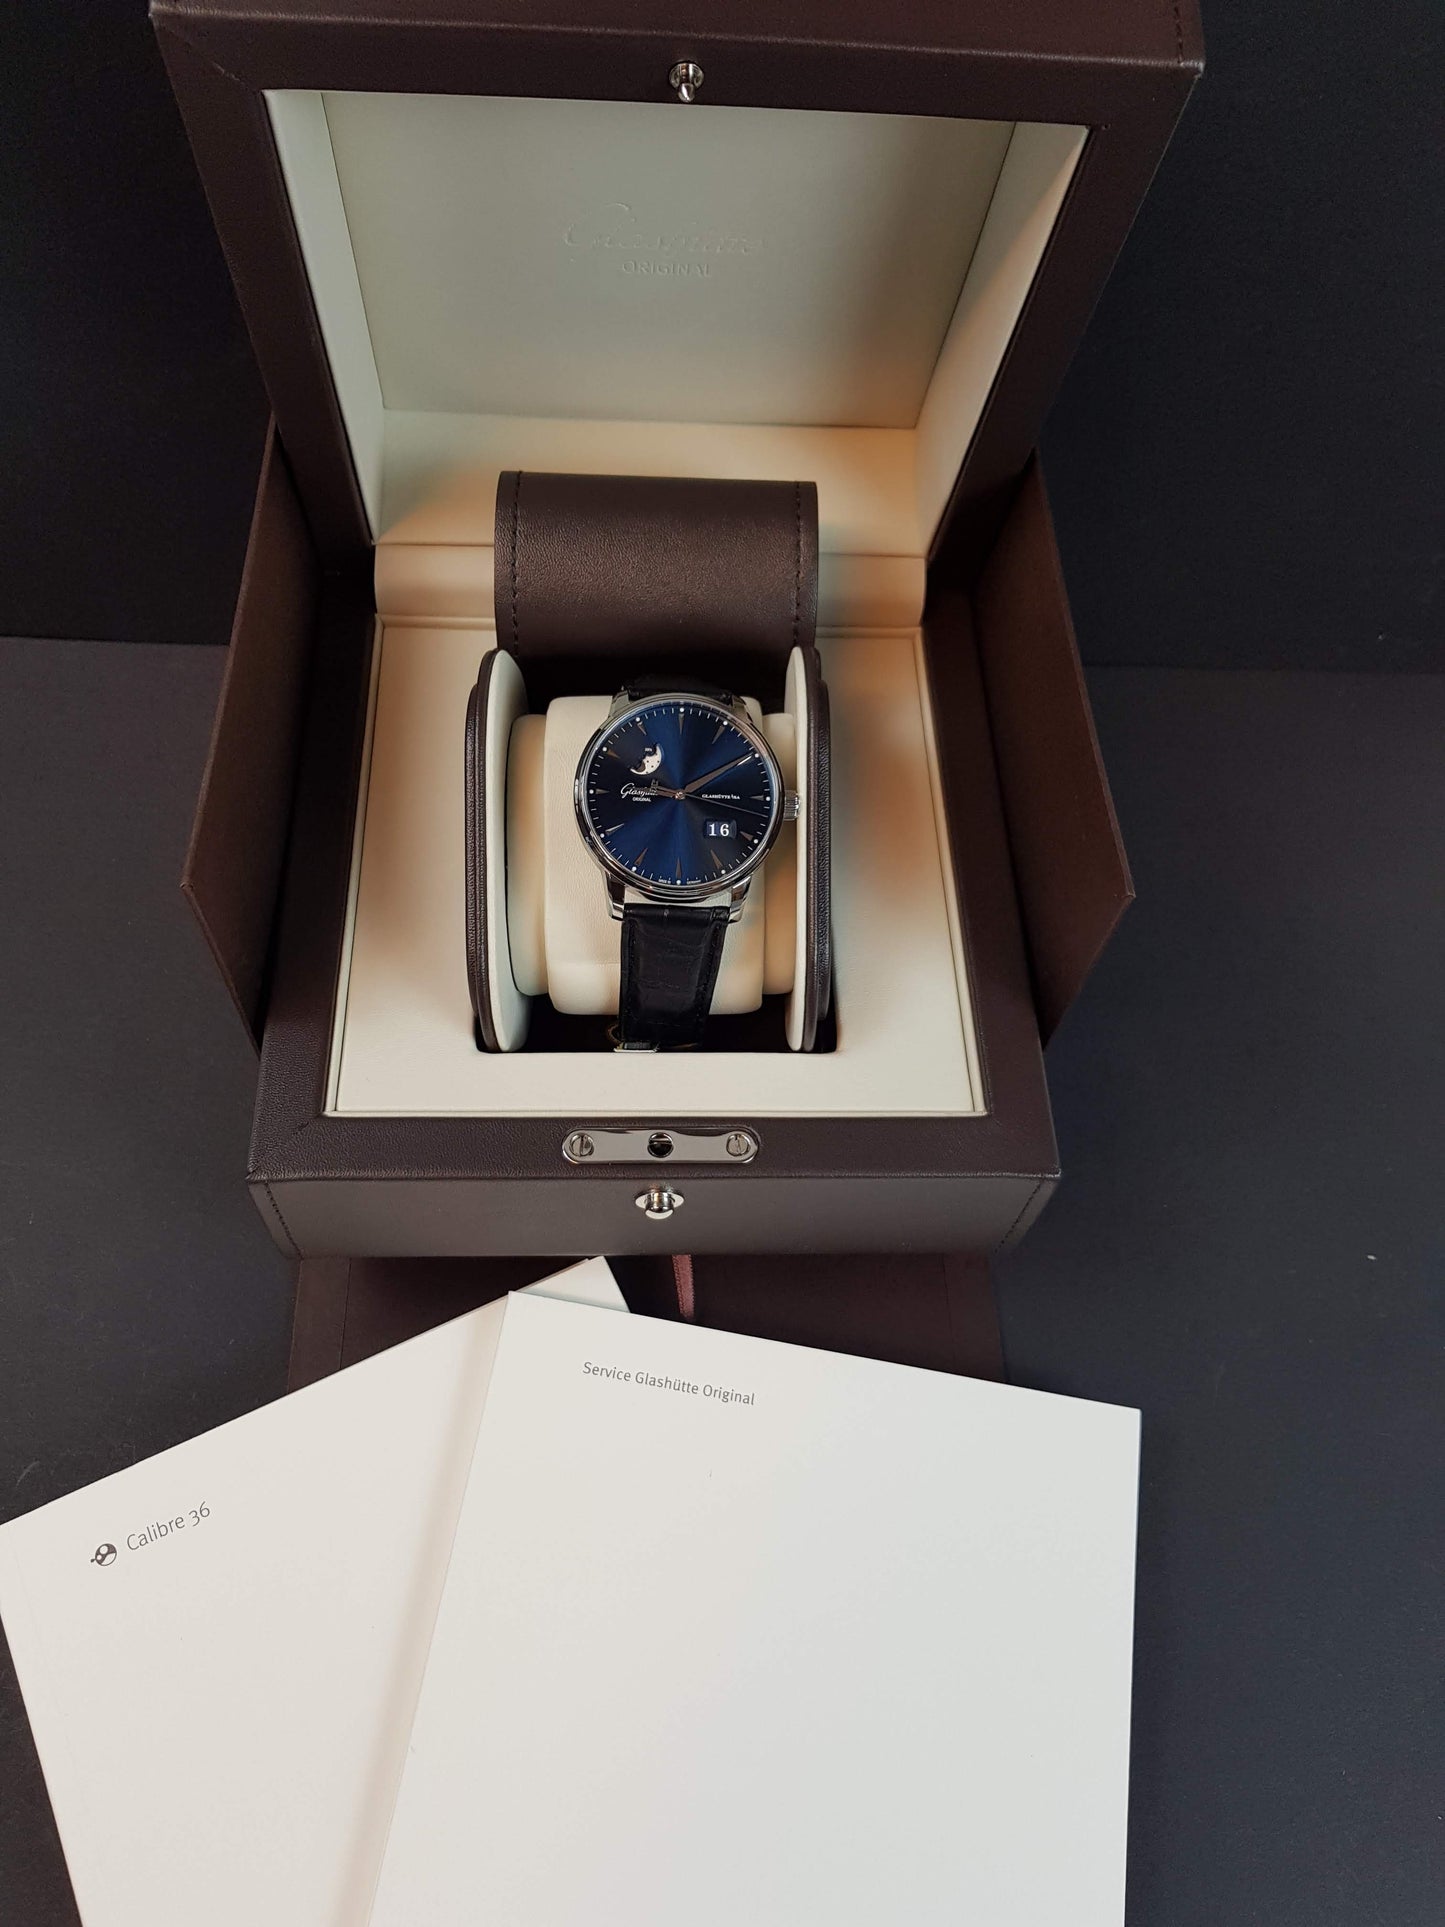 GLASHÜTTE Senator Excellence Panorama Date moon phase 1-36-04-04-02-30 blue 42mm stainless steel, automatic movement, Louisiana alligator leather strap black 